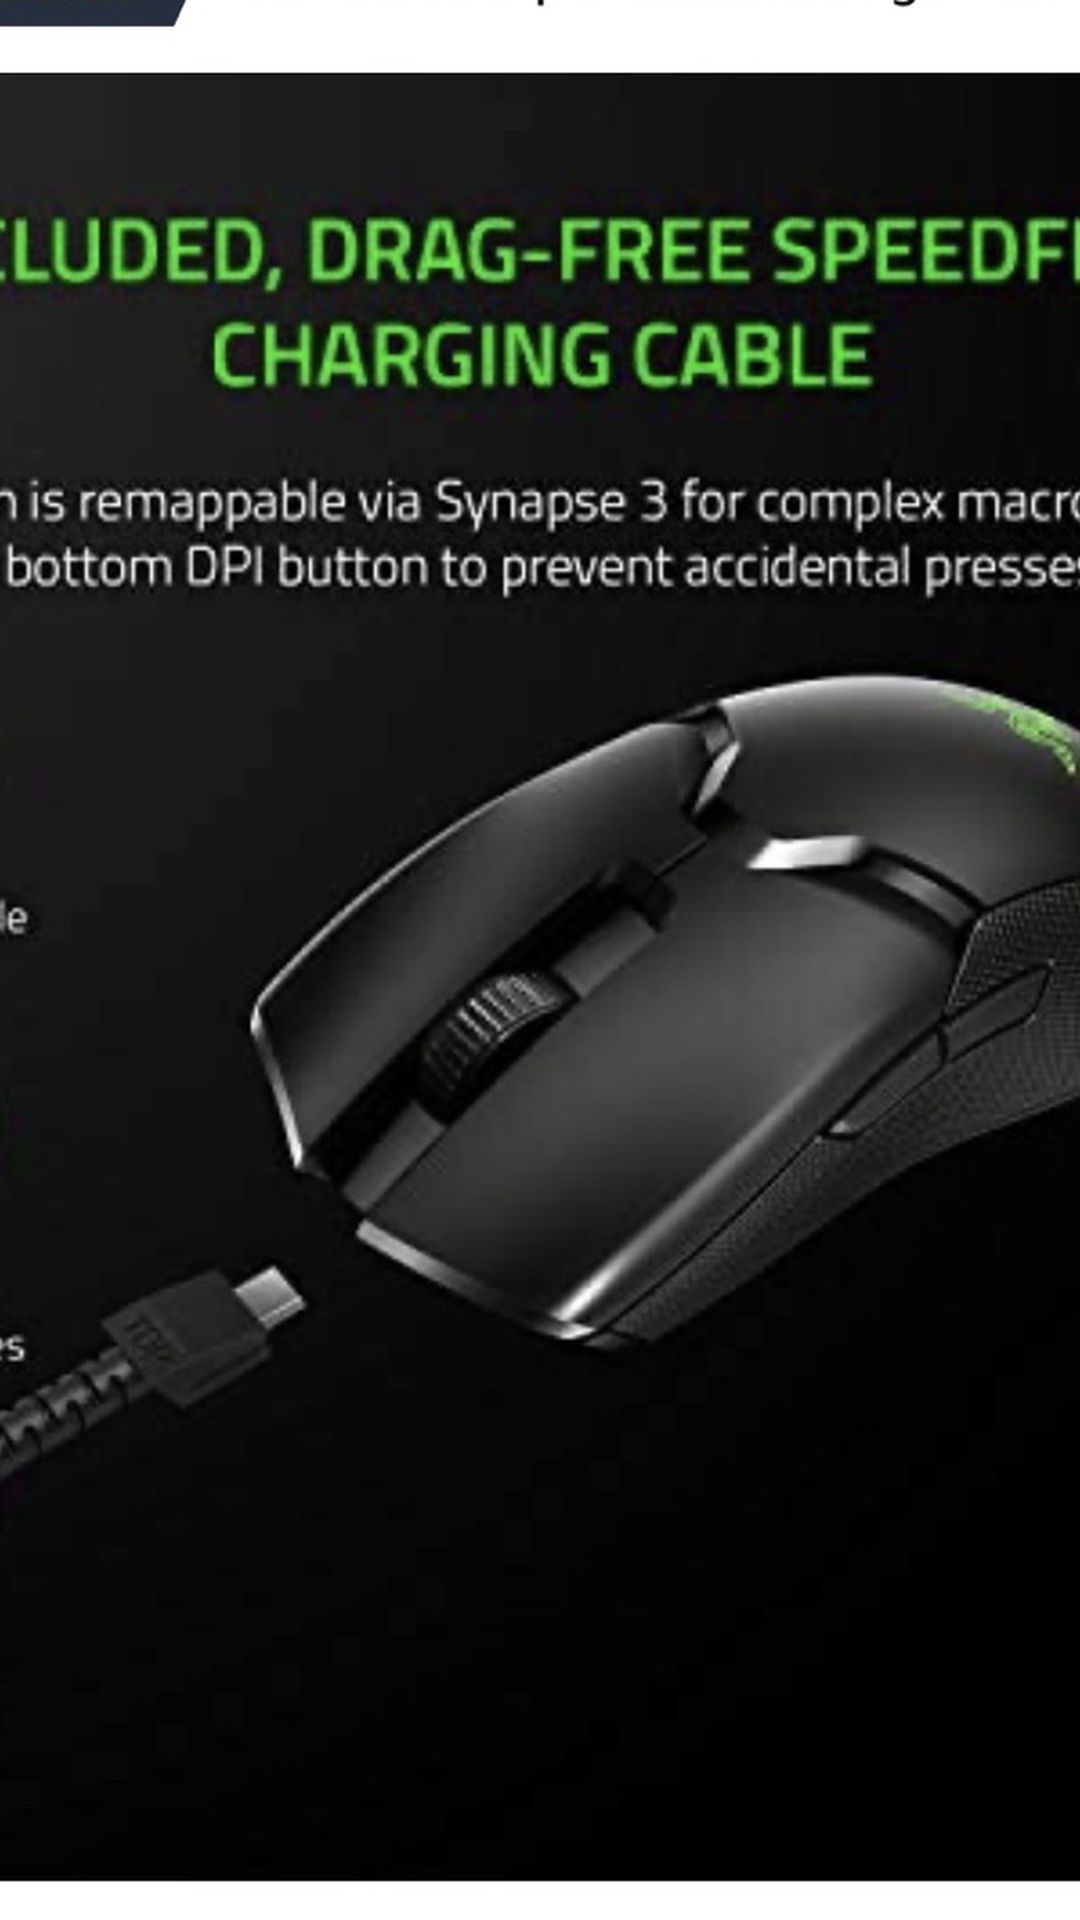 Razer Viper Ultimate Lightest Wireless Gaming Mouse: Fastest Gaming Switches - 20K DPI Optical Sensor - Chroma Lighting - 8 Programmable Buttons - 70